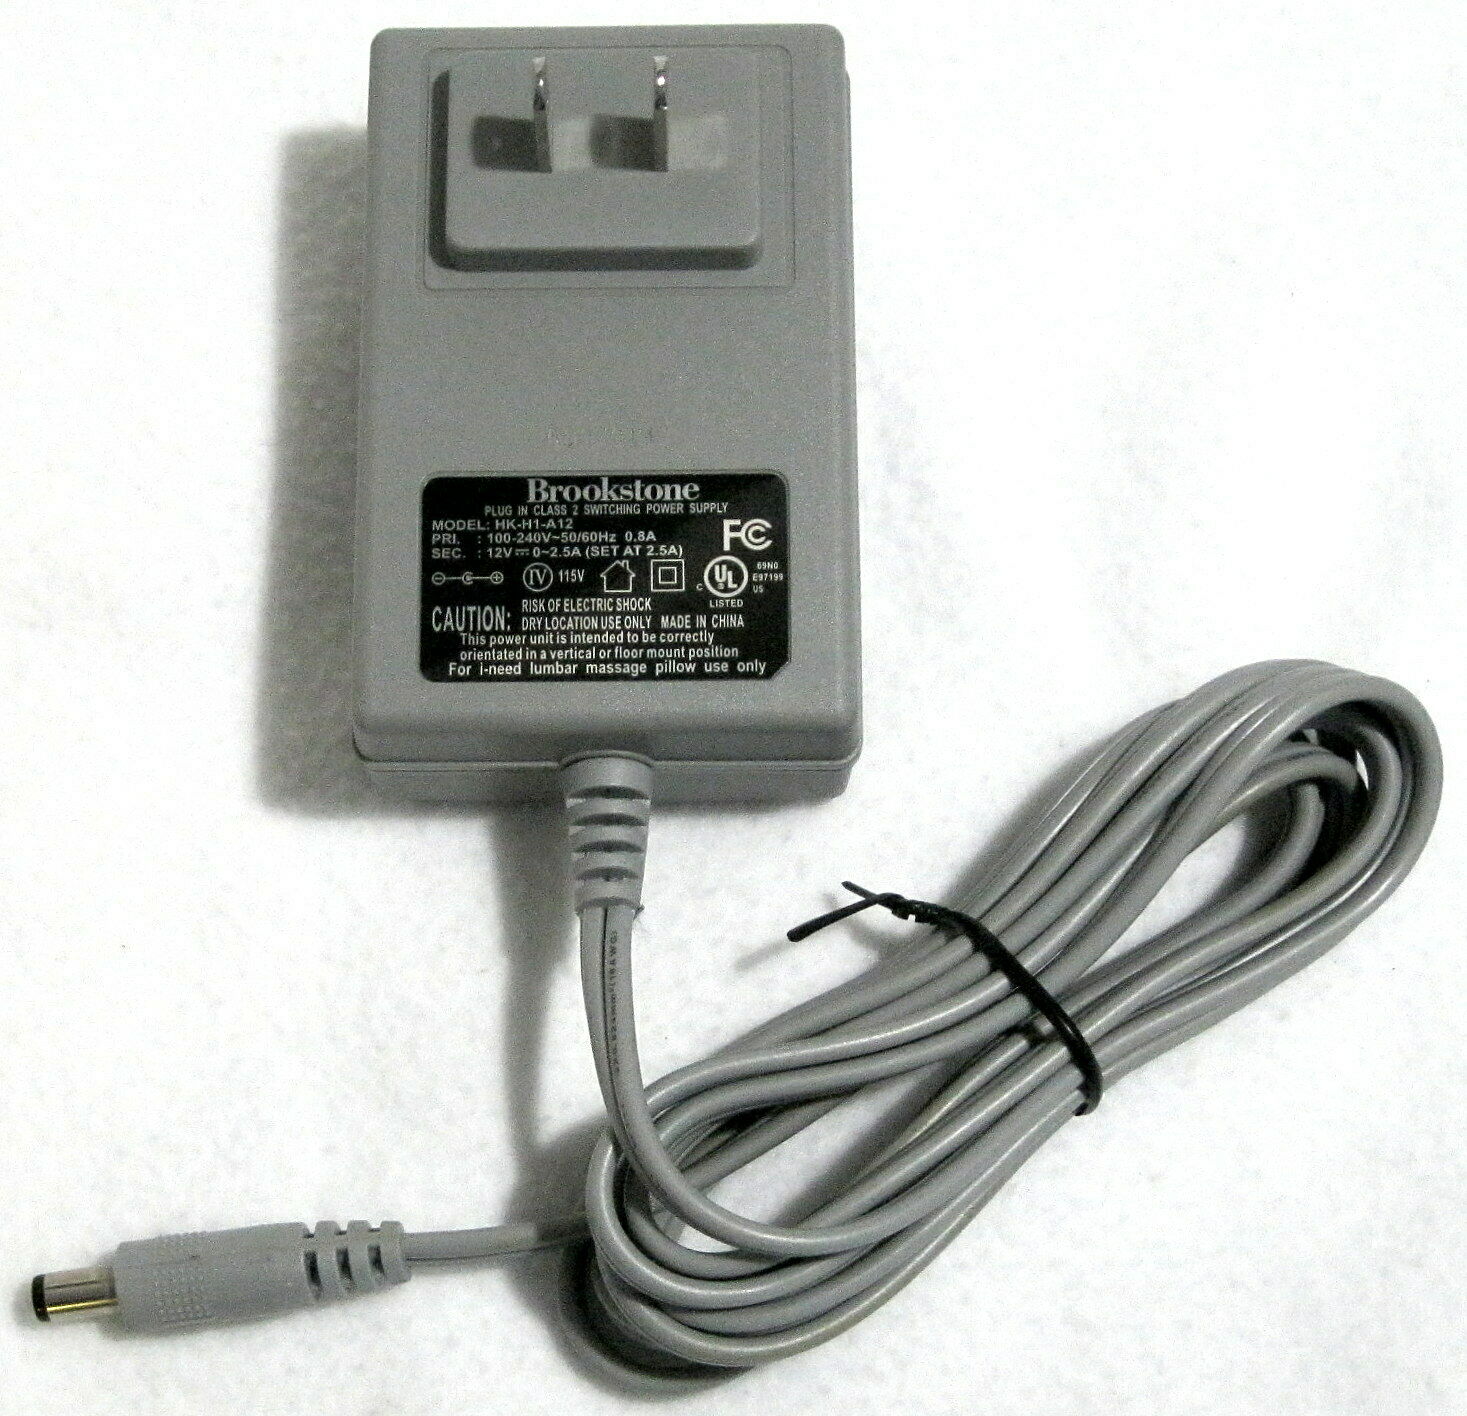 NEW 12V 0-2.5A Brookstone HK-H1-A12 Power Supply AC DC Adapter - Click Image to Close